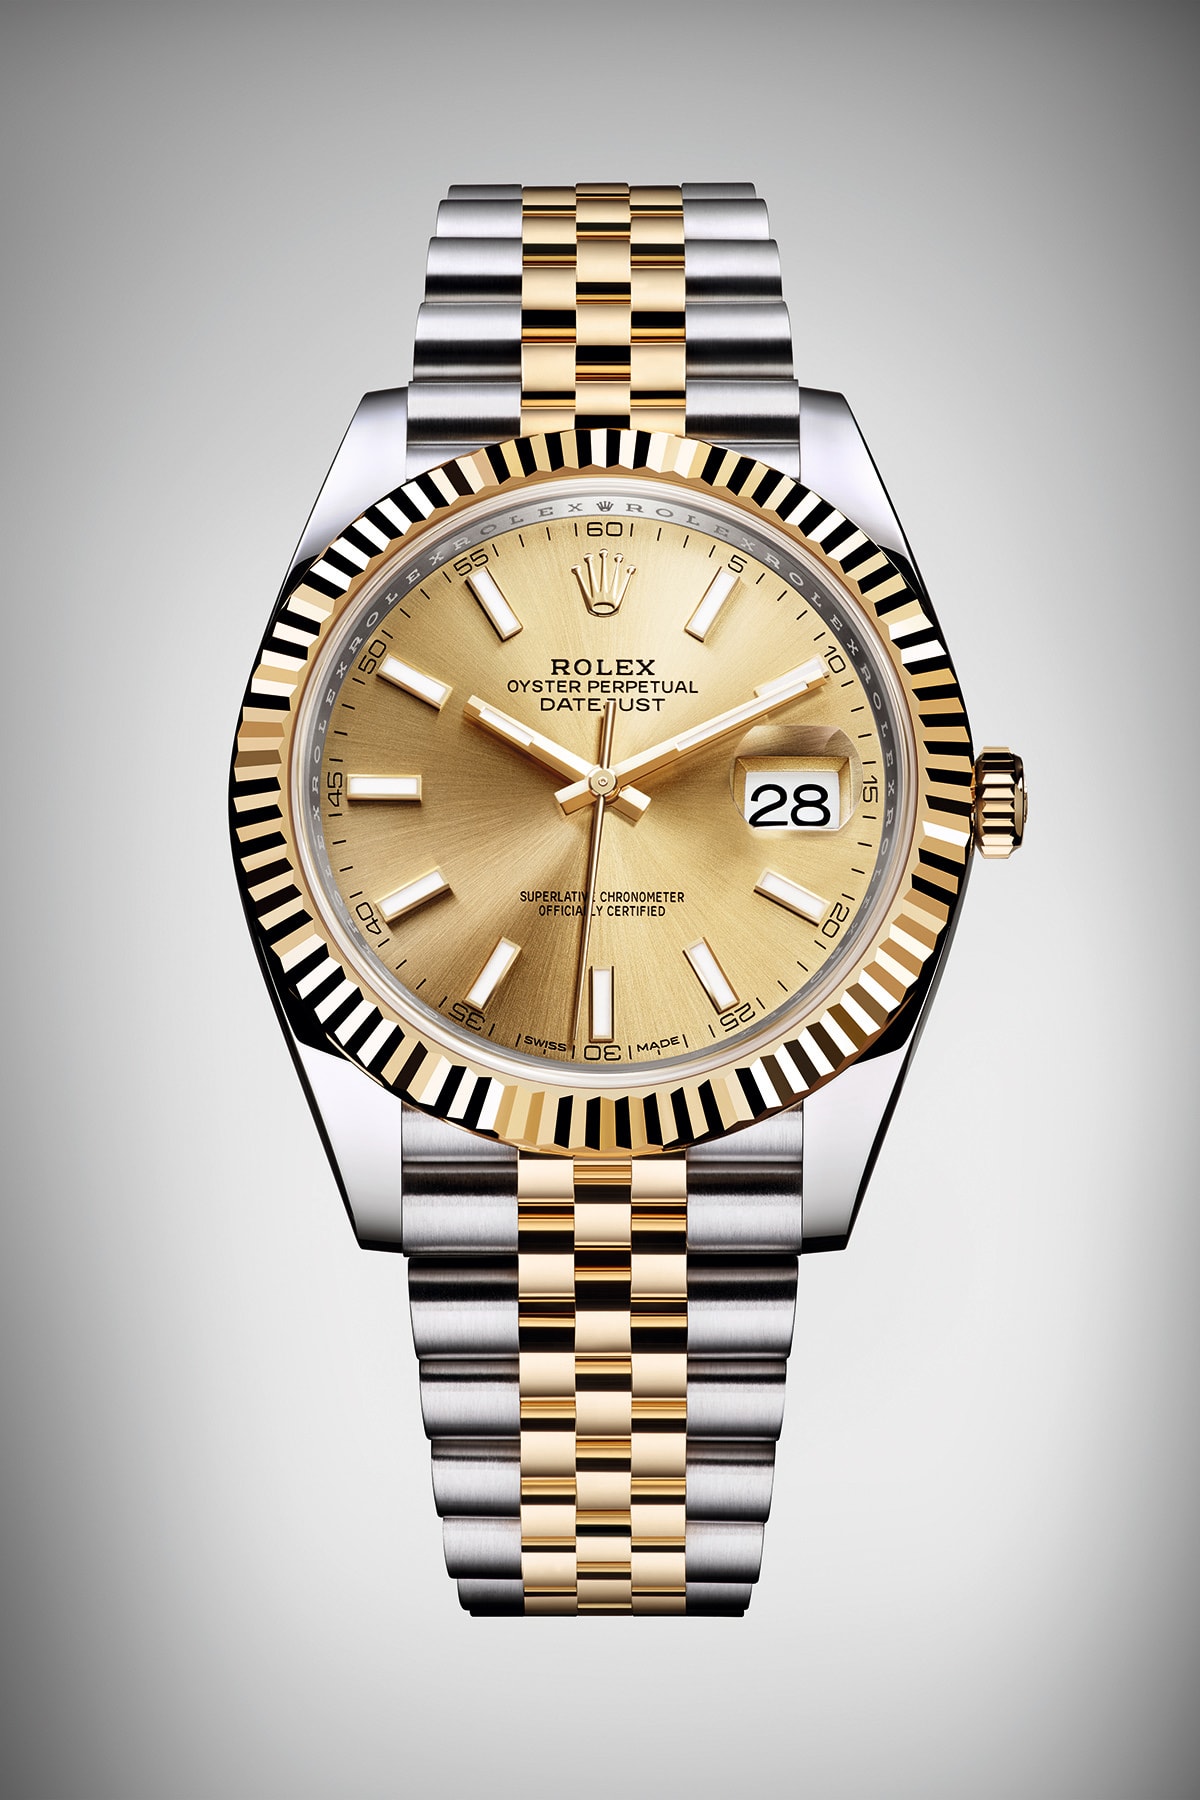 Rolex Oyster Perpetual Datejust 新一代 41 mm 經典再現